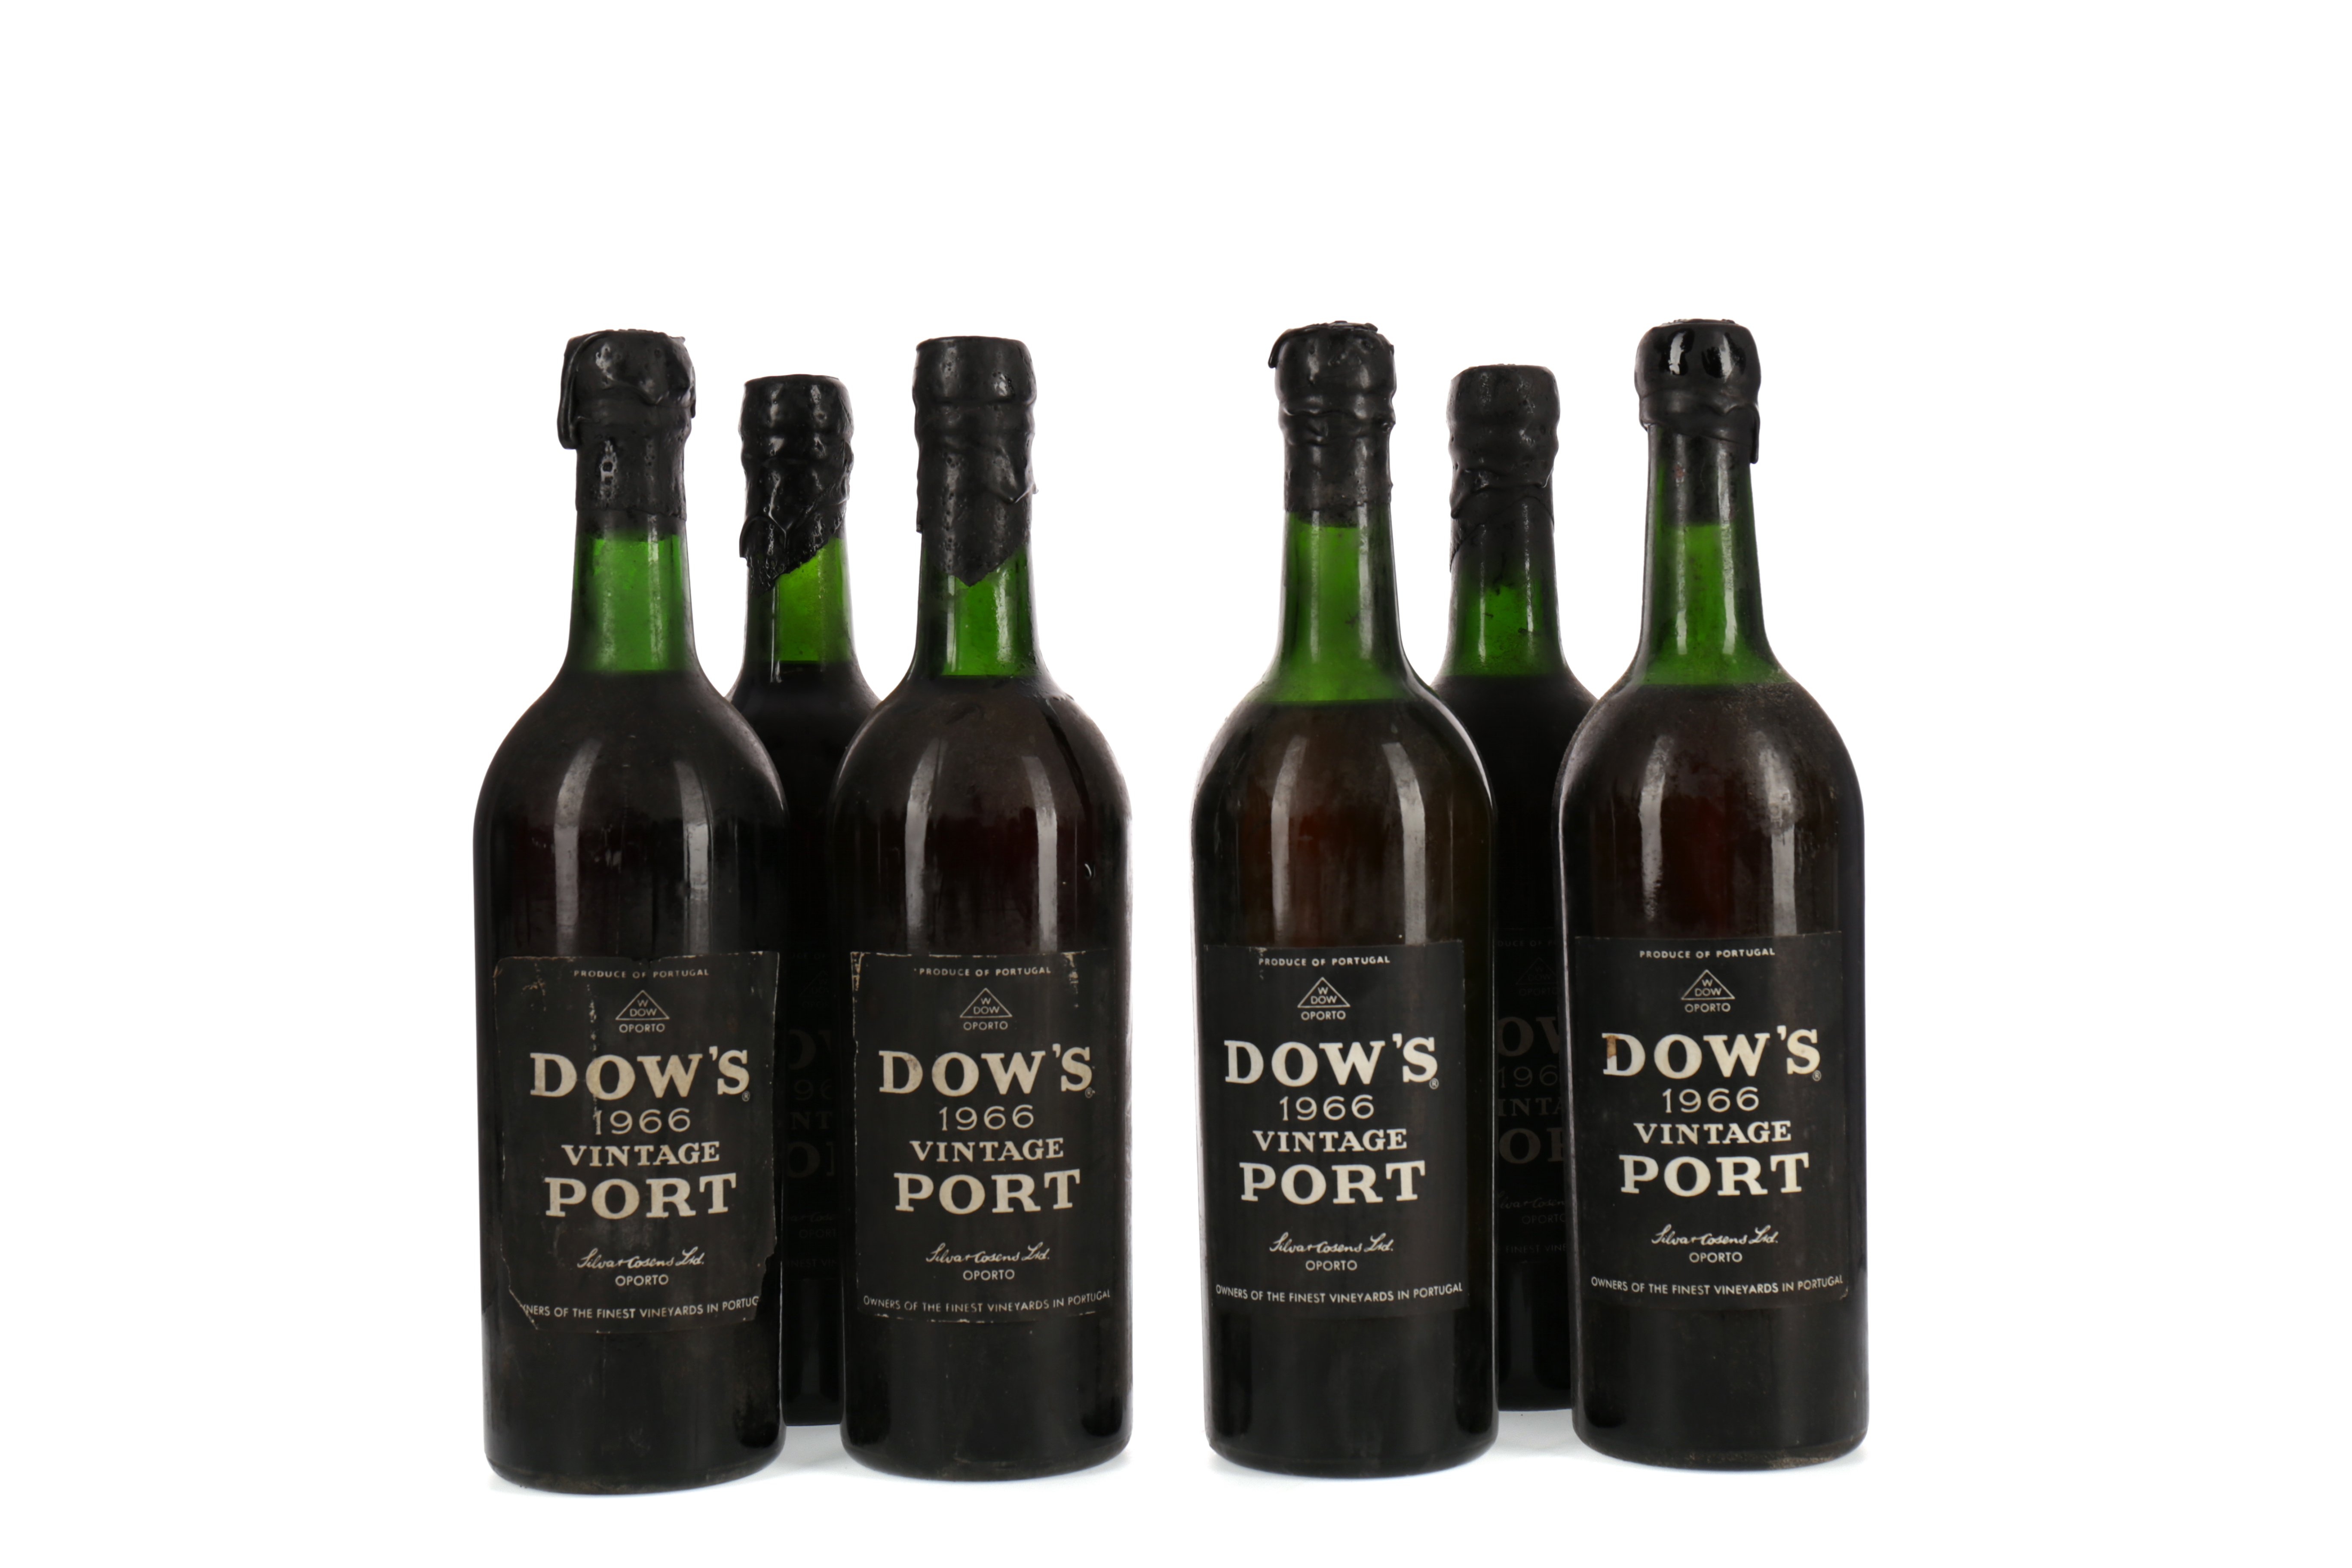 SIX BOTTLES OF DOW'S 10